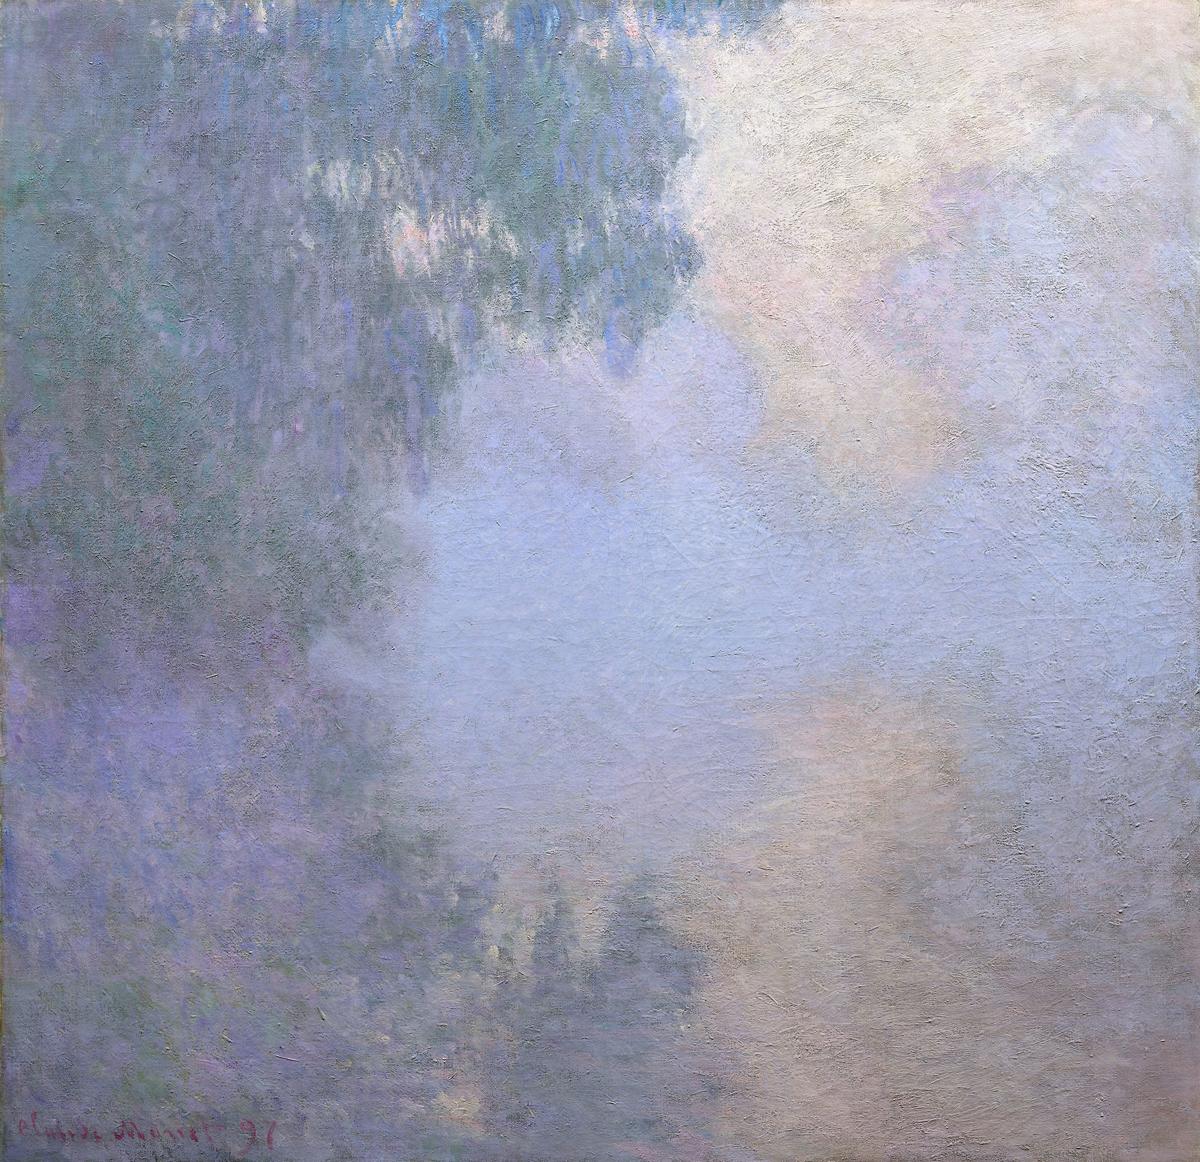 The original master work this is based on. Branch of the Seine near Giverny (Mist) by Claude Monet - 1897 - CC0 Public Domain Designation